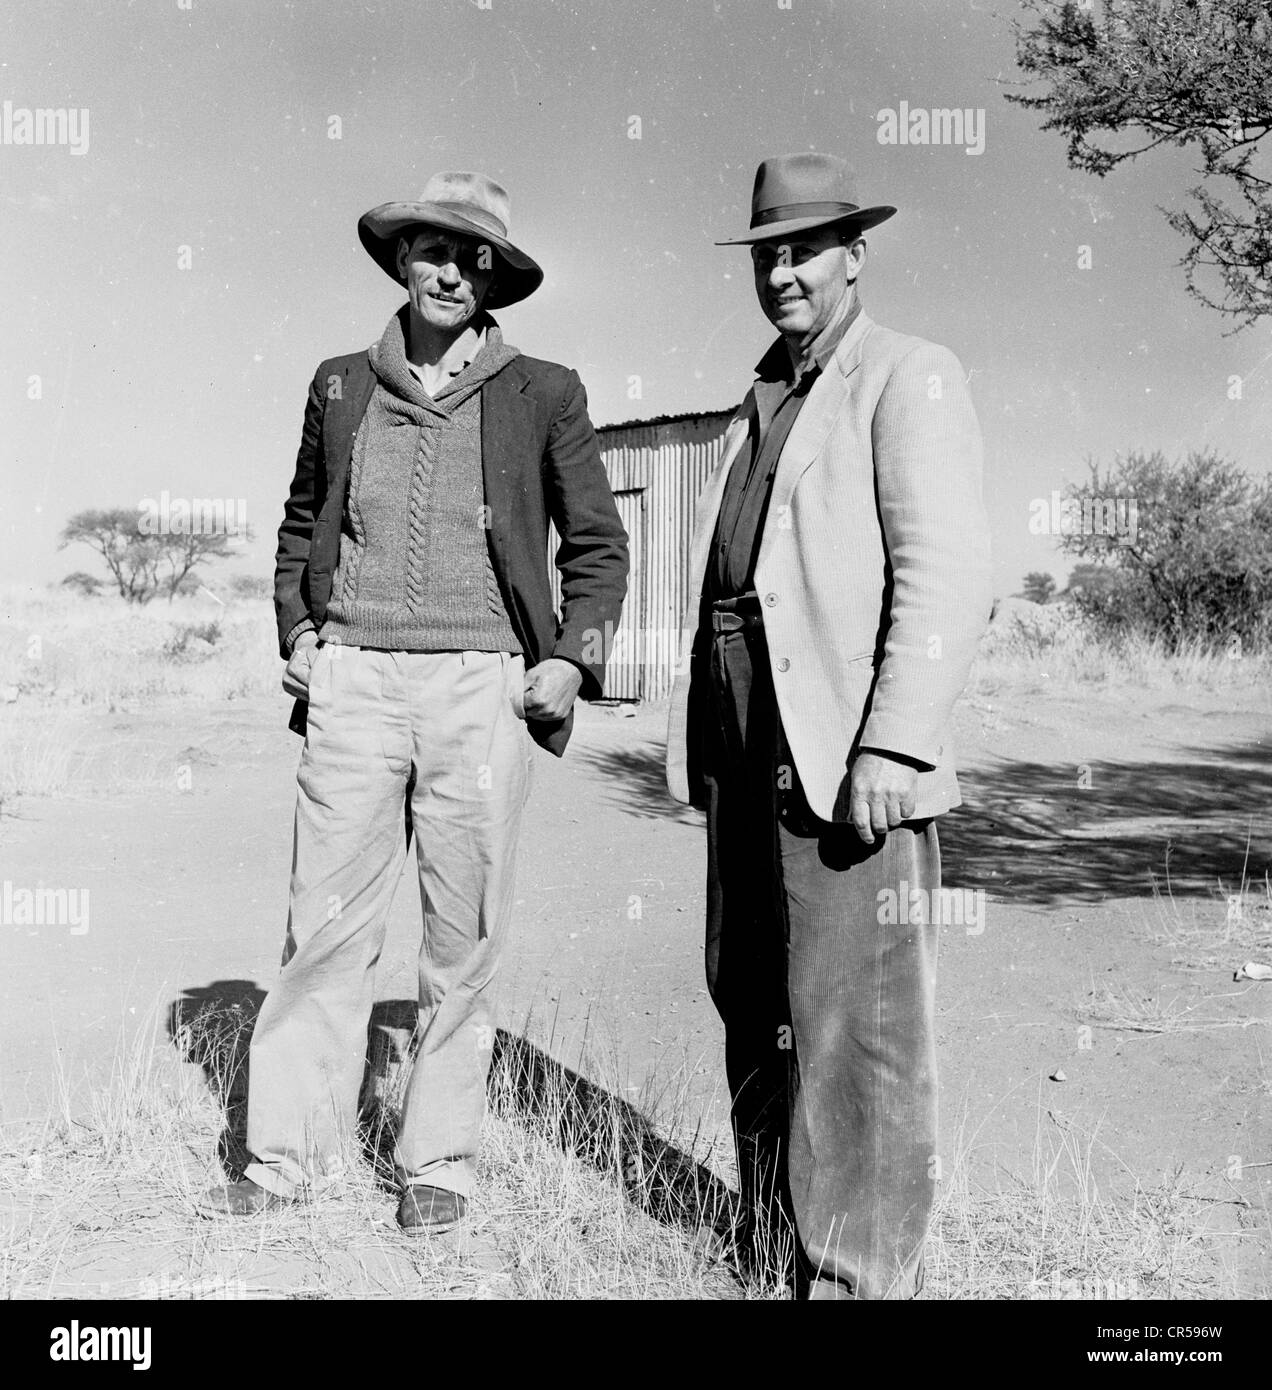 South Africa,1950s. Two local Afrikaan's stand in outback. Stock Photo